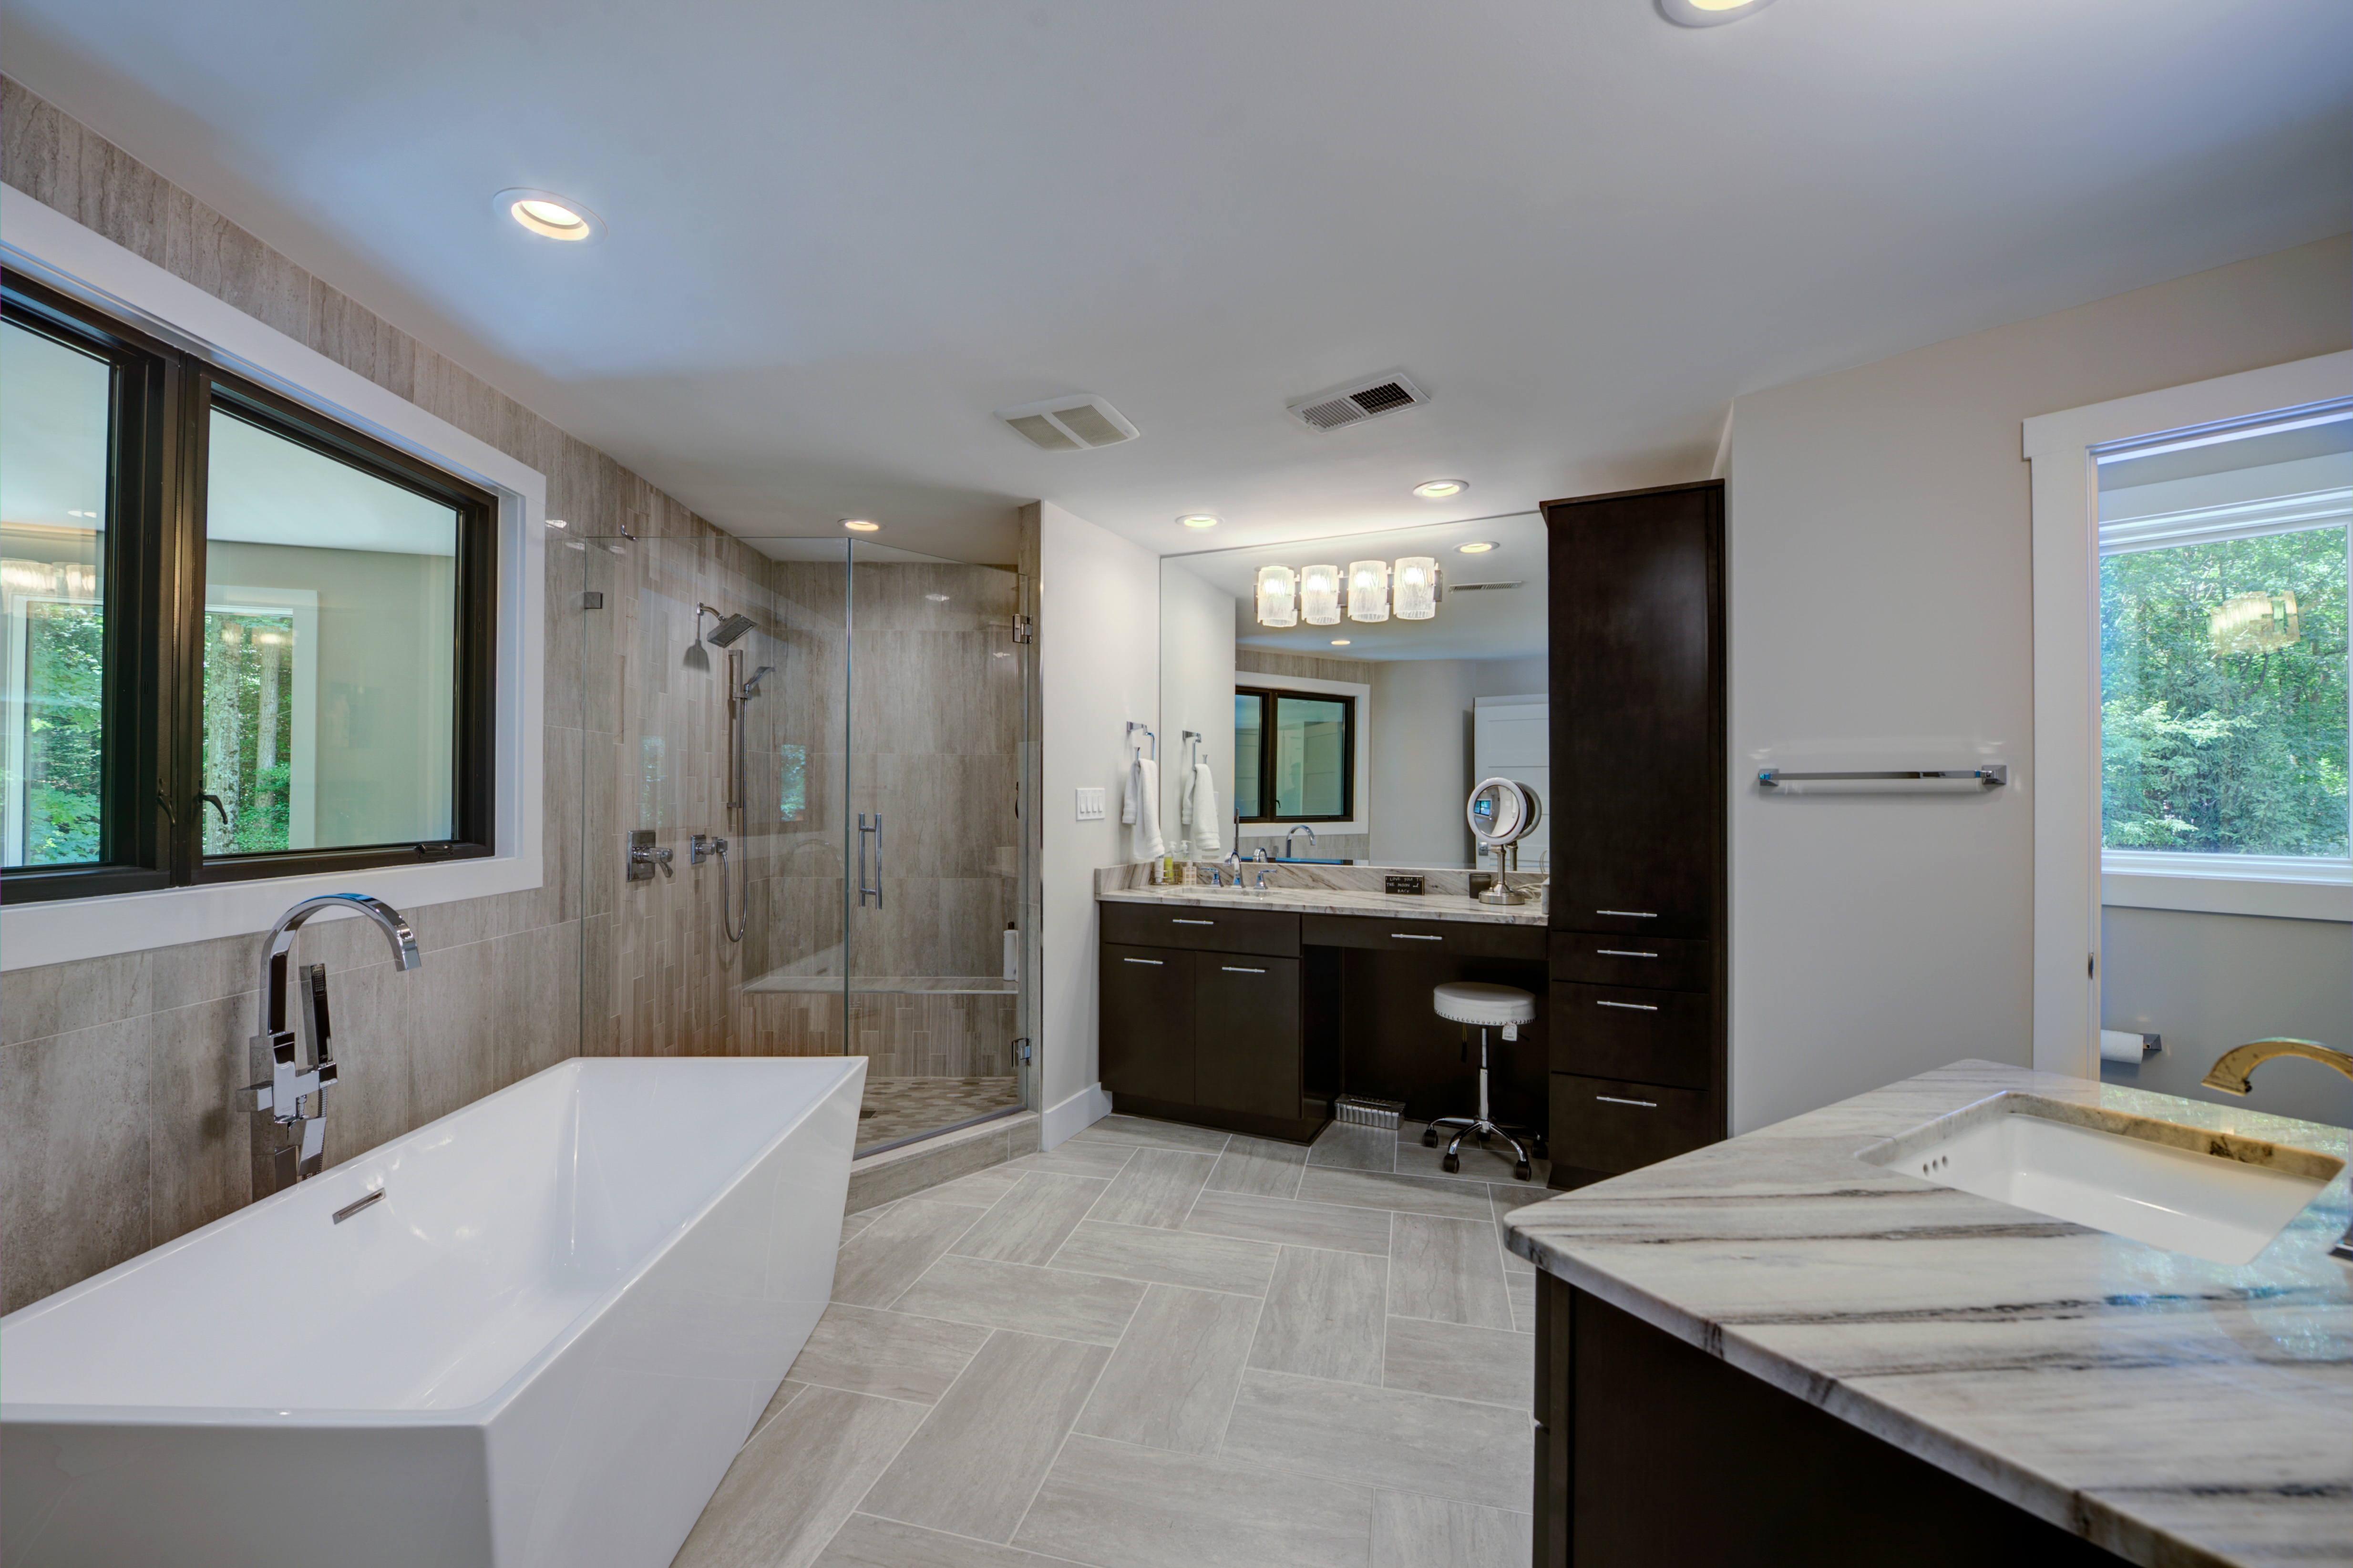 Master bathroom with stand-alone bathtub and walk-in shower